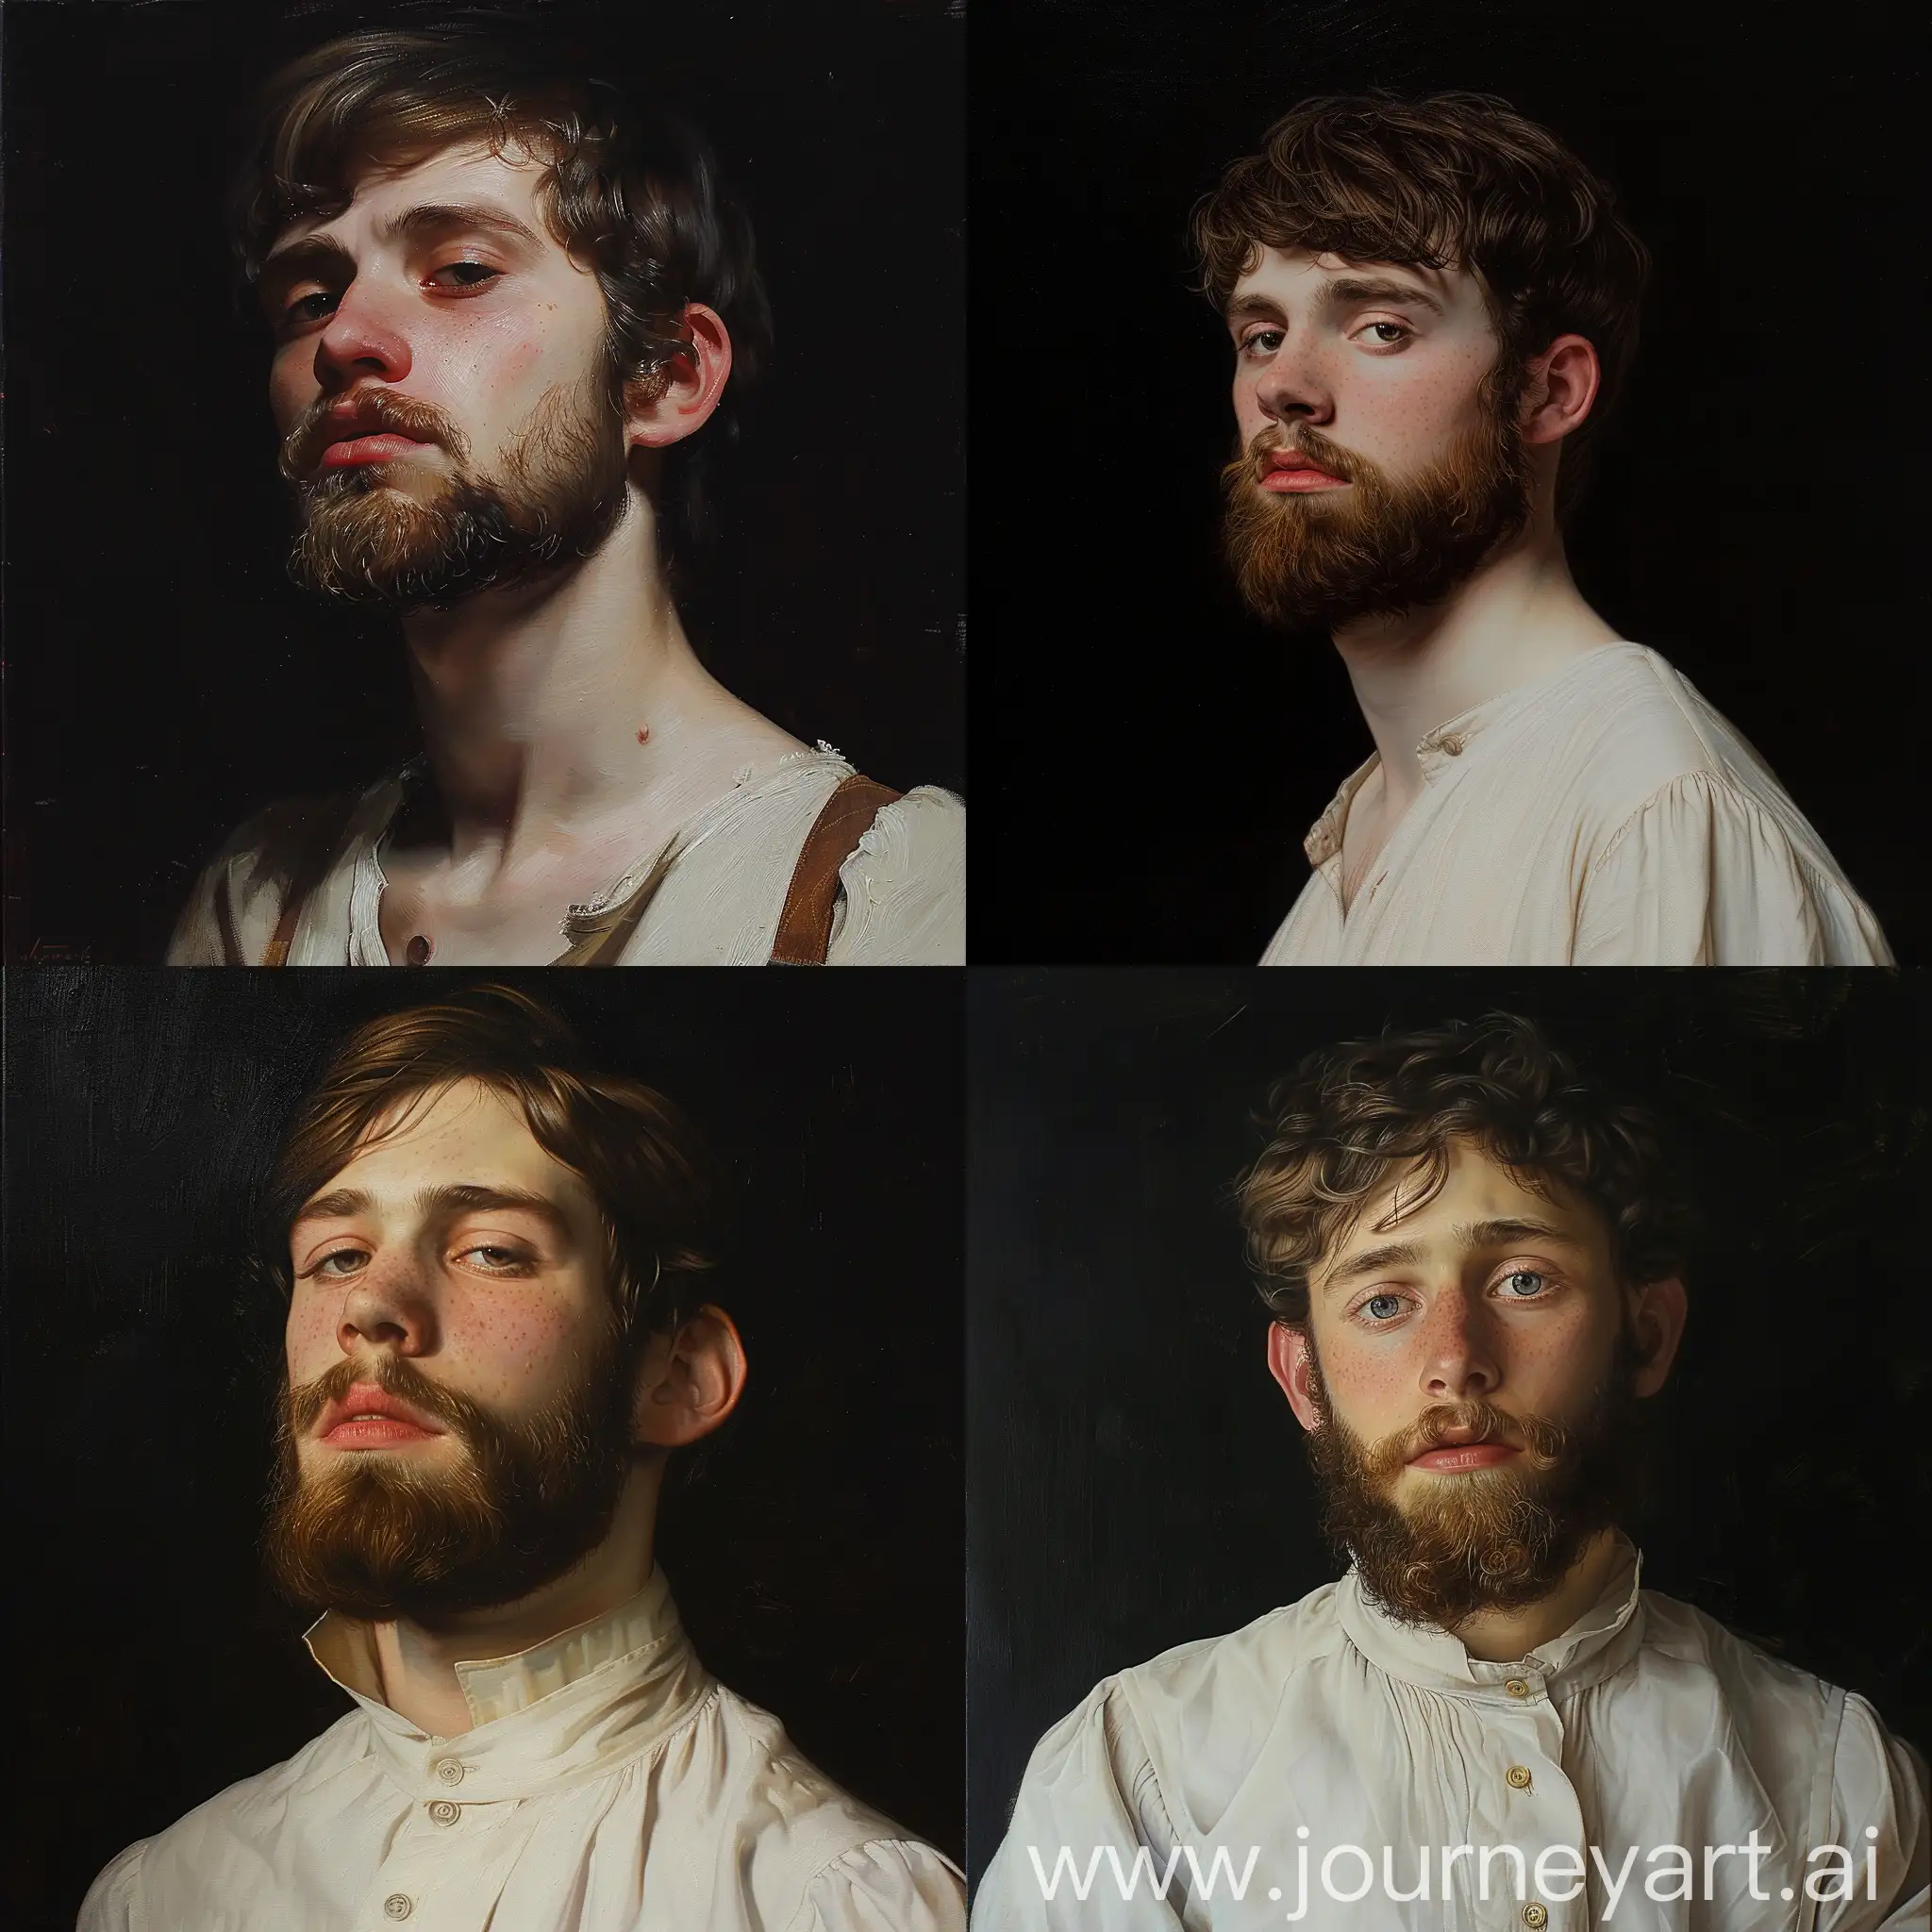 a painting of a young man with beard, wlop John singer Sargent, jeremy lipkin and rob rey, range murata jeremy lipking, John singer Sargent, black background, jeremy lipkin, lensculture portrait awards, casey baugh and james jean, detailed realism in painting, award-winning portrait, amazingly detailed oil painting